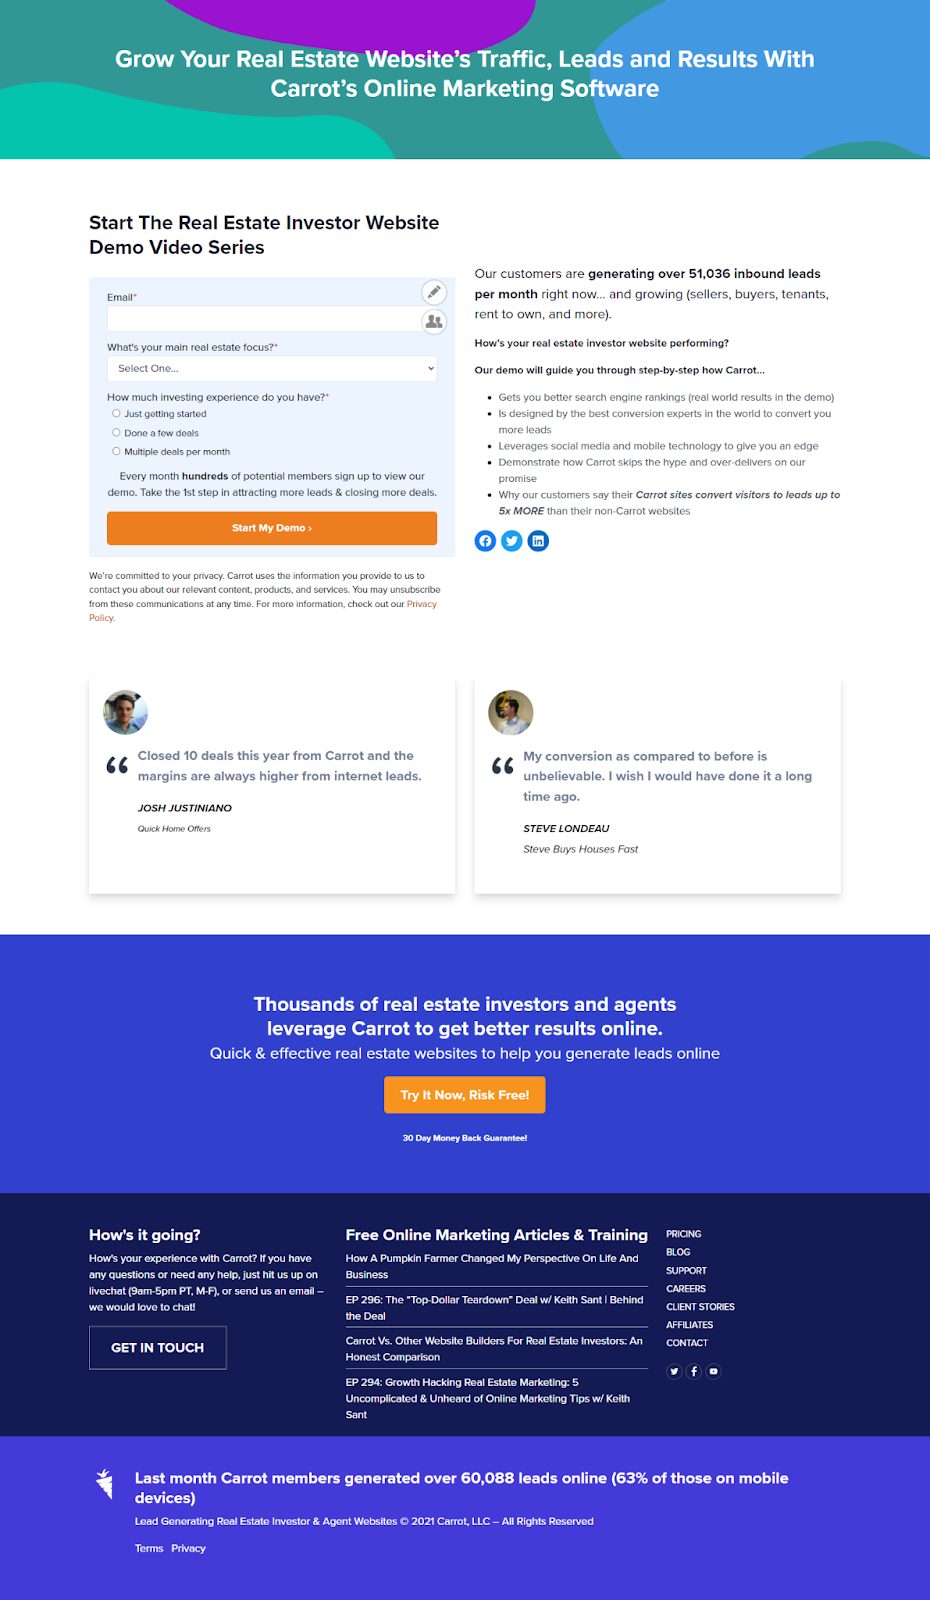 Product landing page Carrot